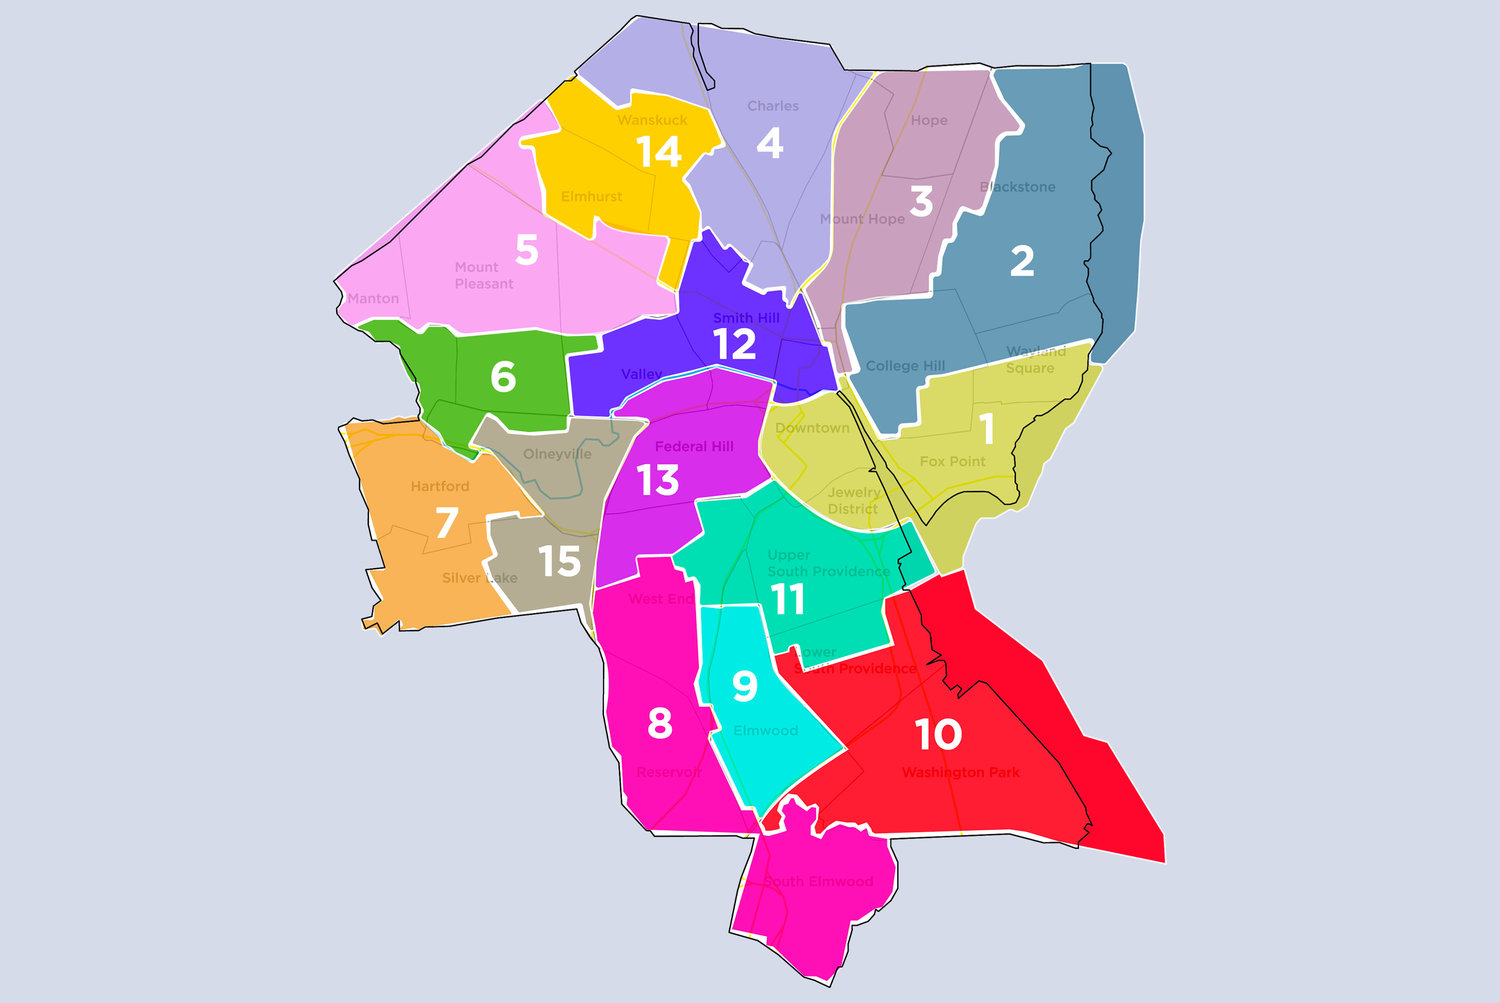 Not sure which ward is yours? Visit 
Council.ProvidenceRI.gov/Ward-Boundaries/